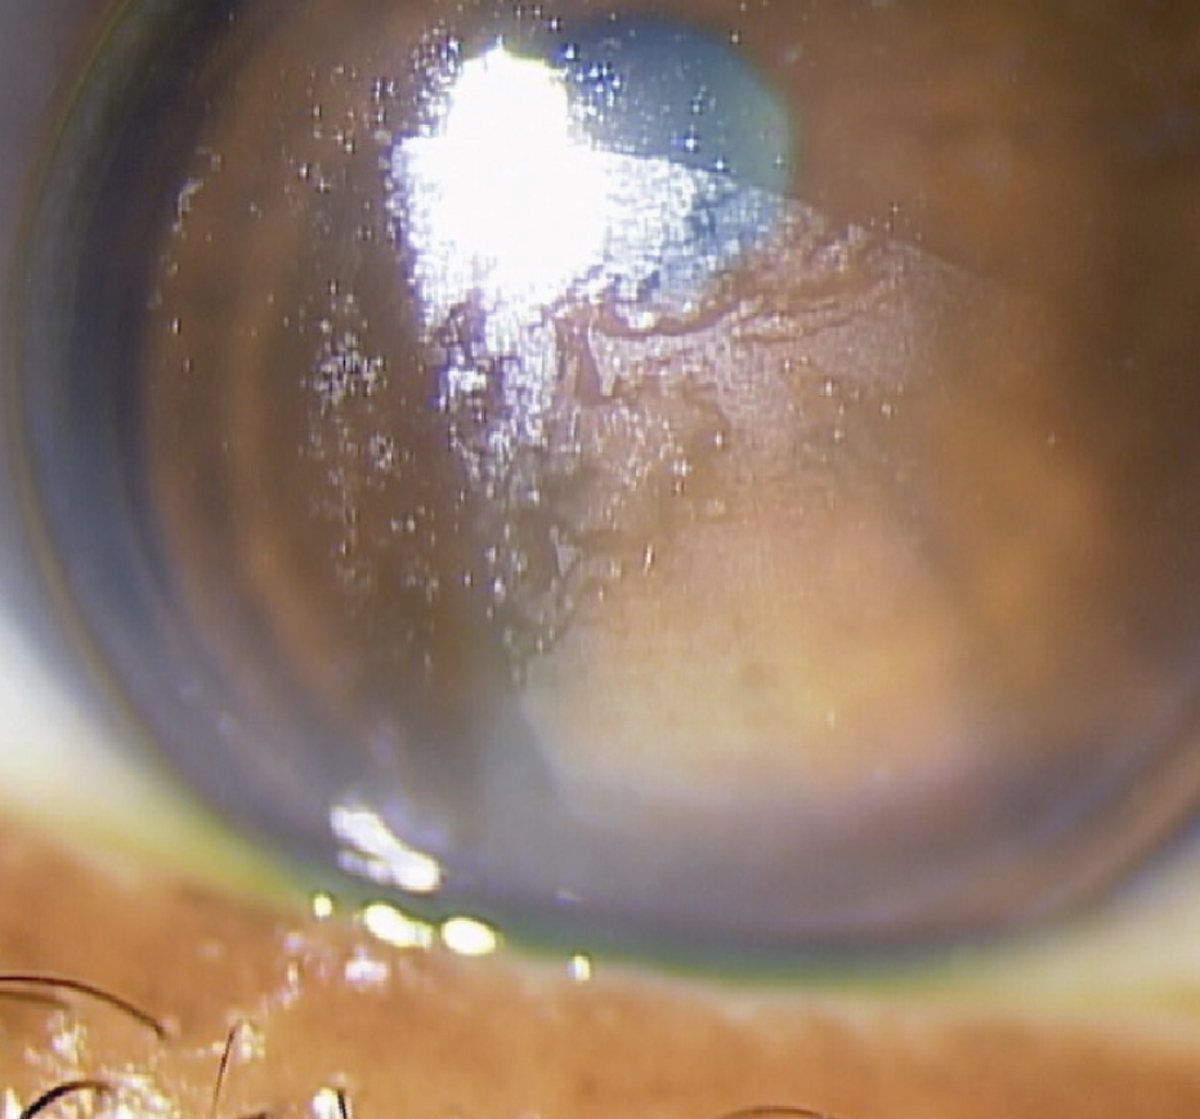 Fig. 1. Corneal lens with acquired mucoprotein film on the anterior lens surface in case one patient. Her incomplete blink pattern is evident, as the upper third of the lens is more clear.